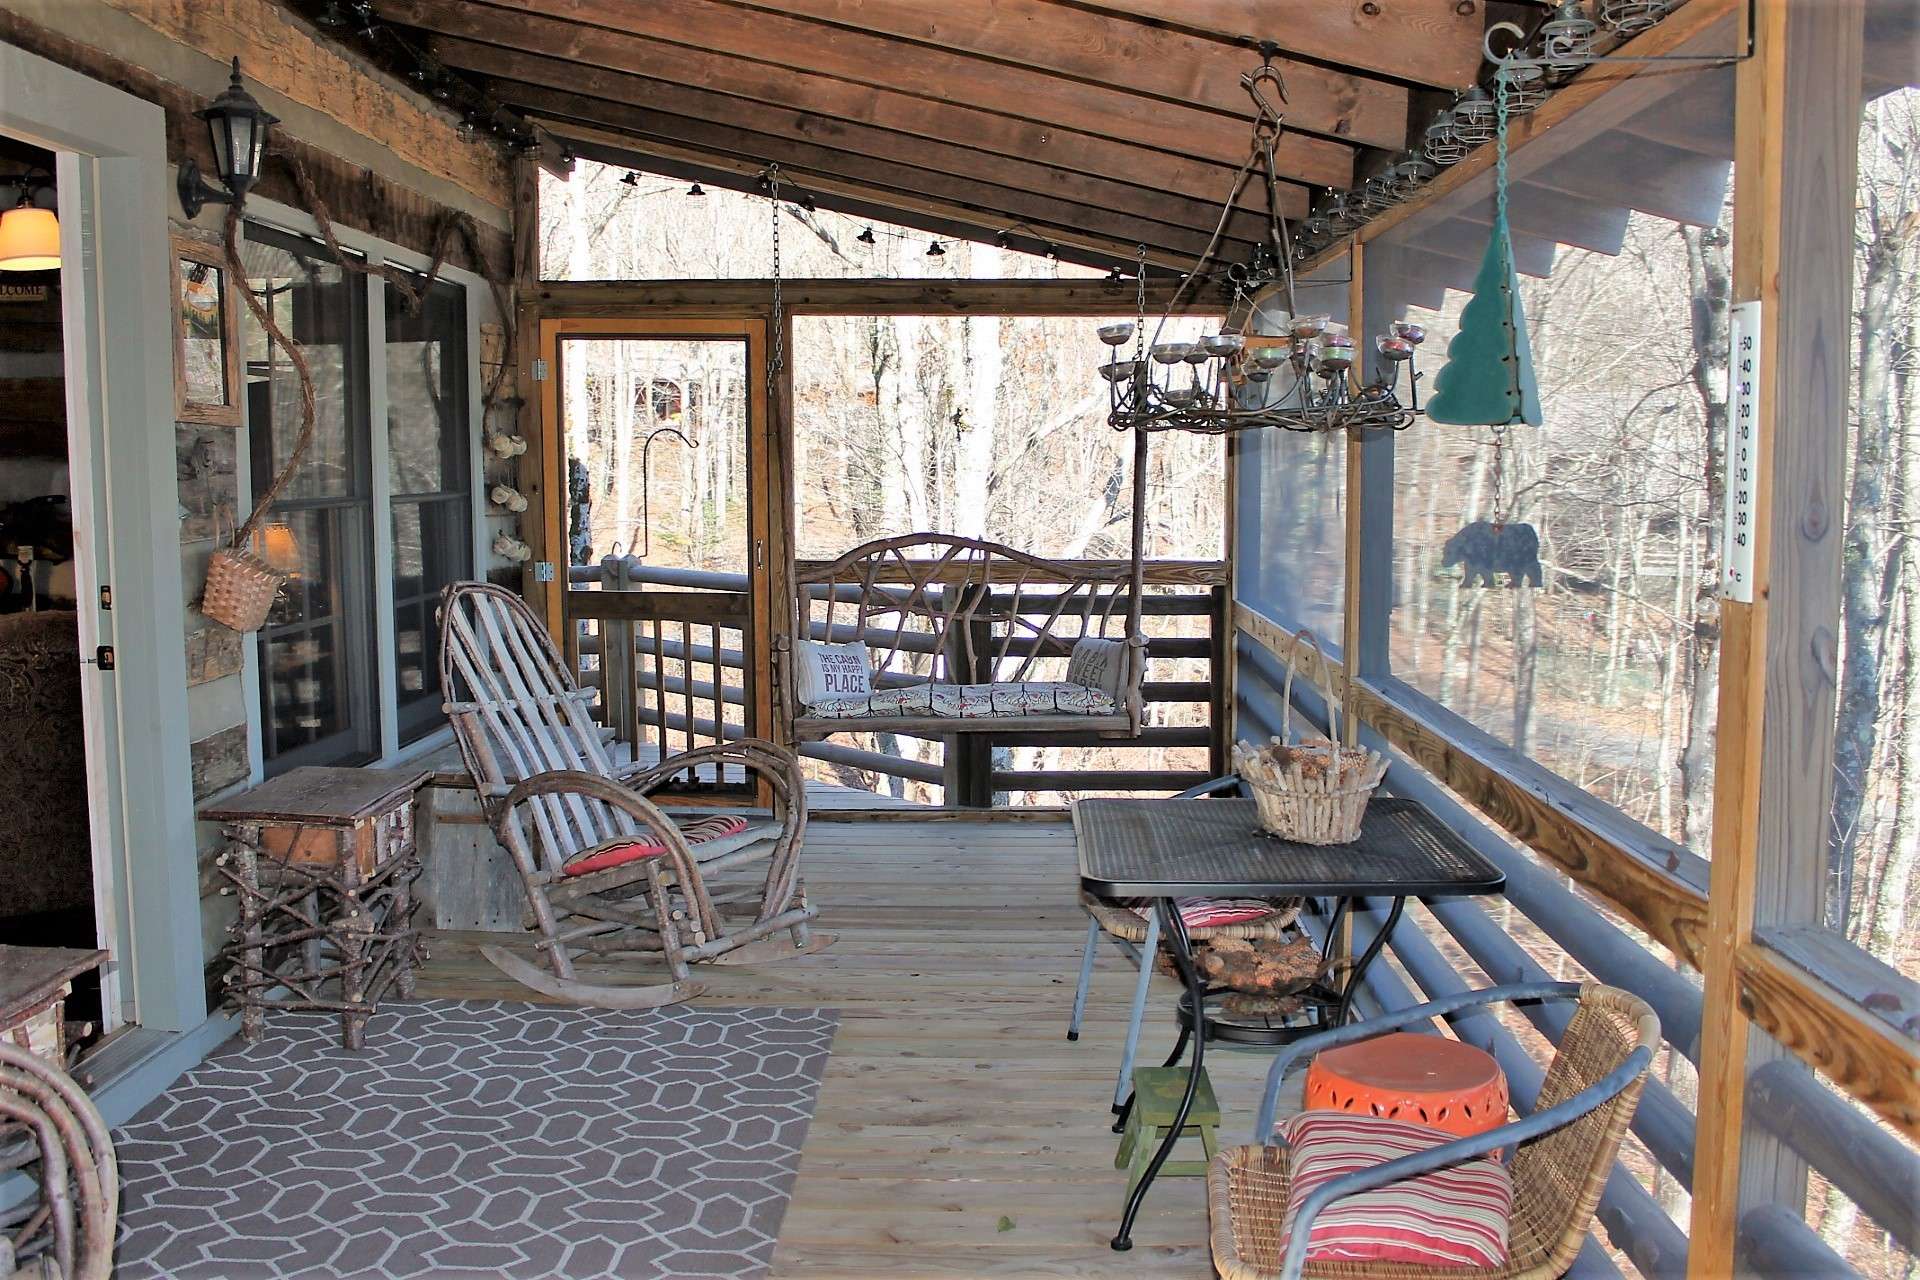 The covered screened porch is ideal for sitting in a rocker or swing sipping your favorite beverage and enjoying the cooler mountain temperatures.